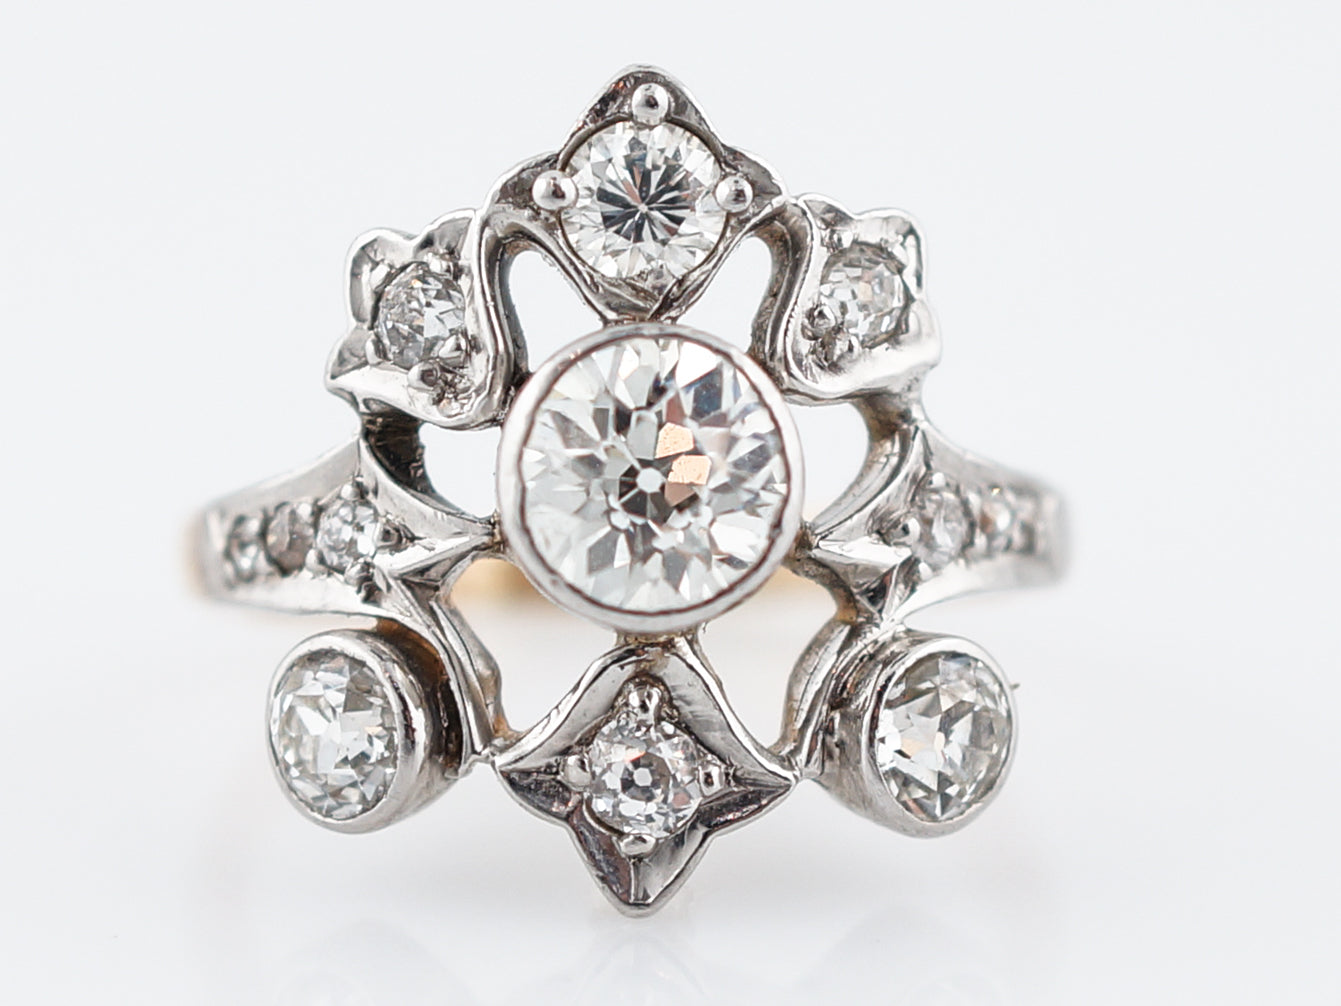 Antique Right Hand Ring Victorian .68 Old European Cut Diamond in Platinum & 14k Yellow Gold